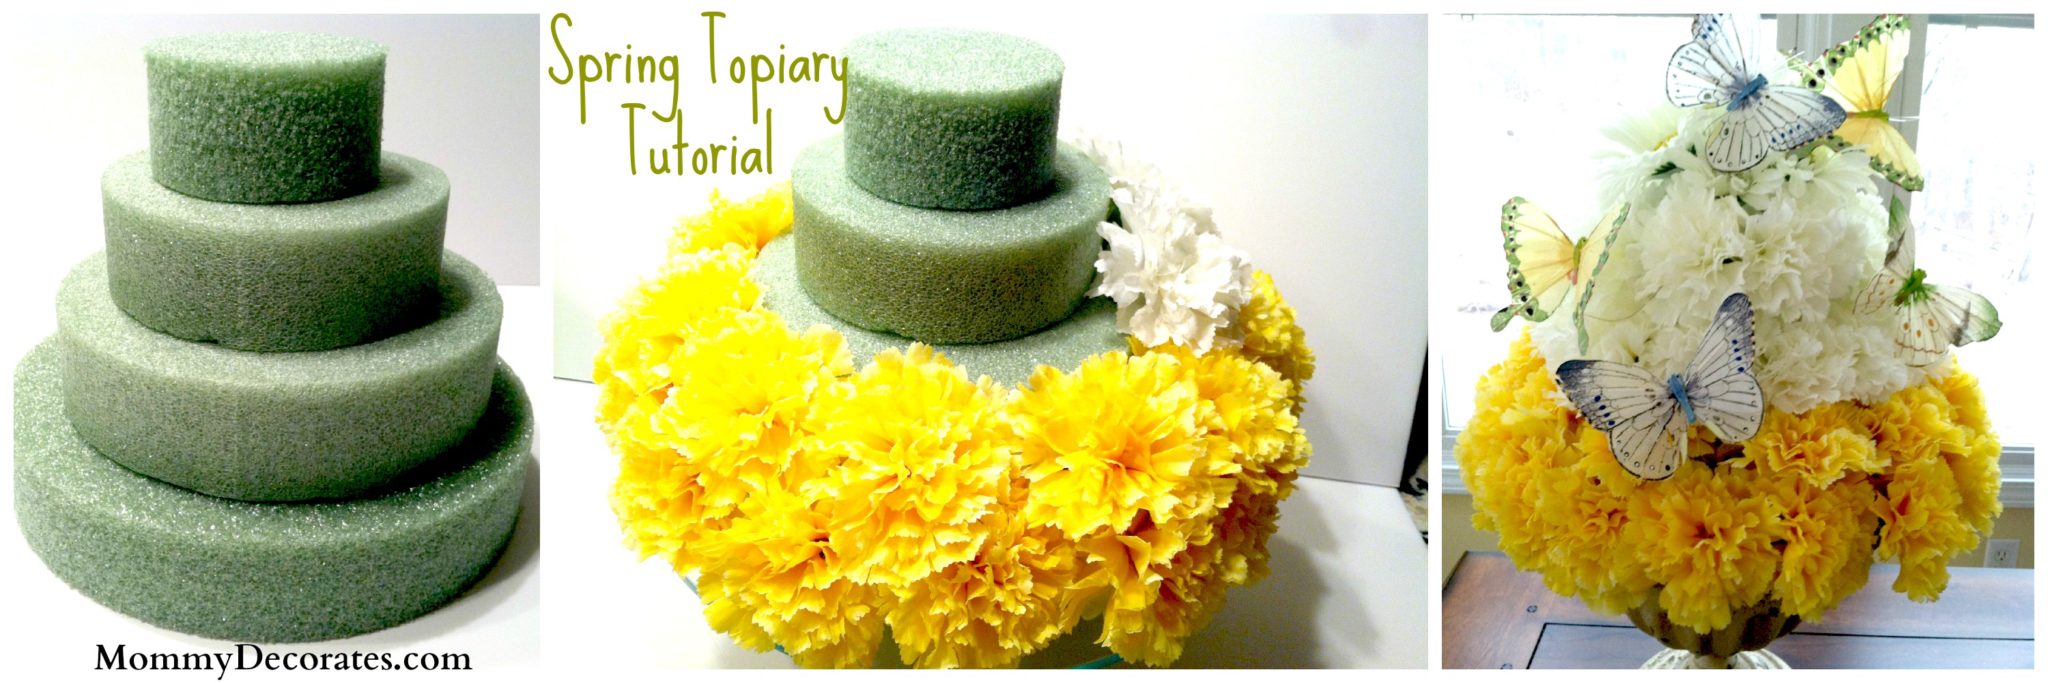 Spring Topiary - How to make one 3 Pictures